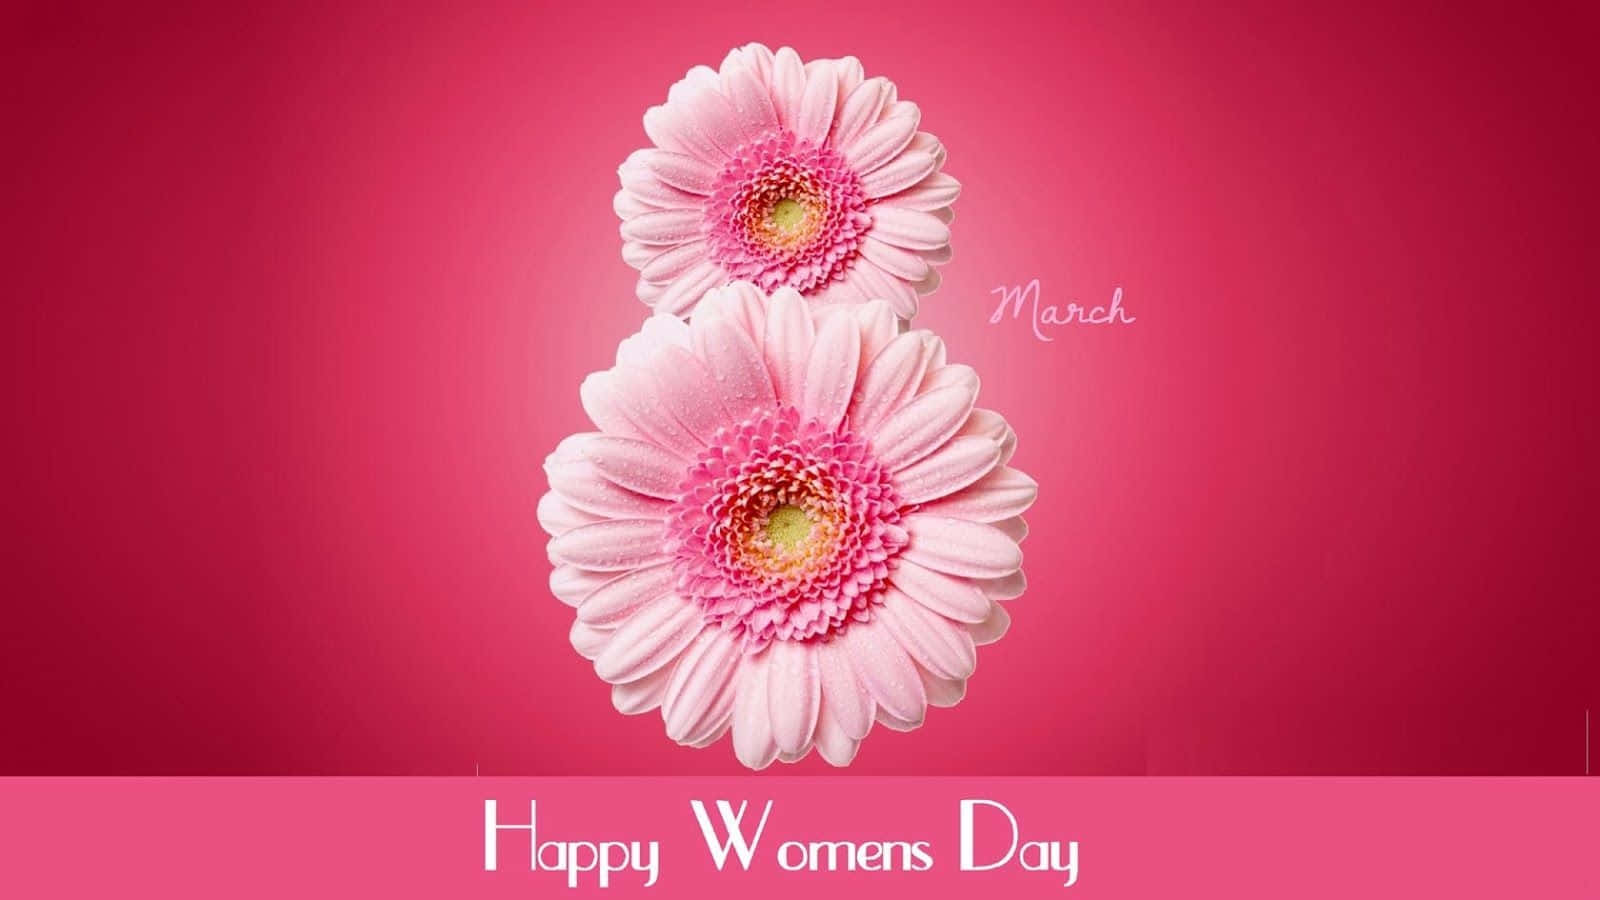 Happy Womens Day 2019 Wishes Wallpaper